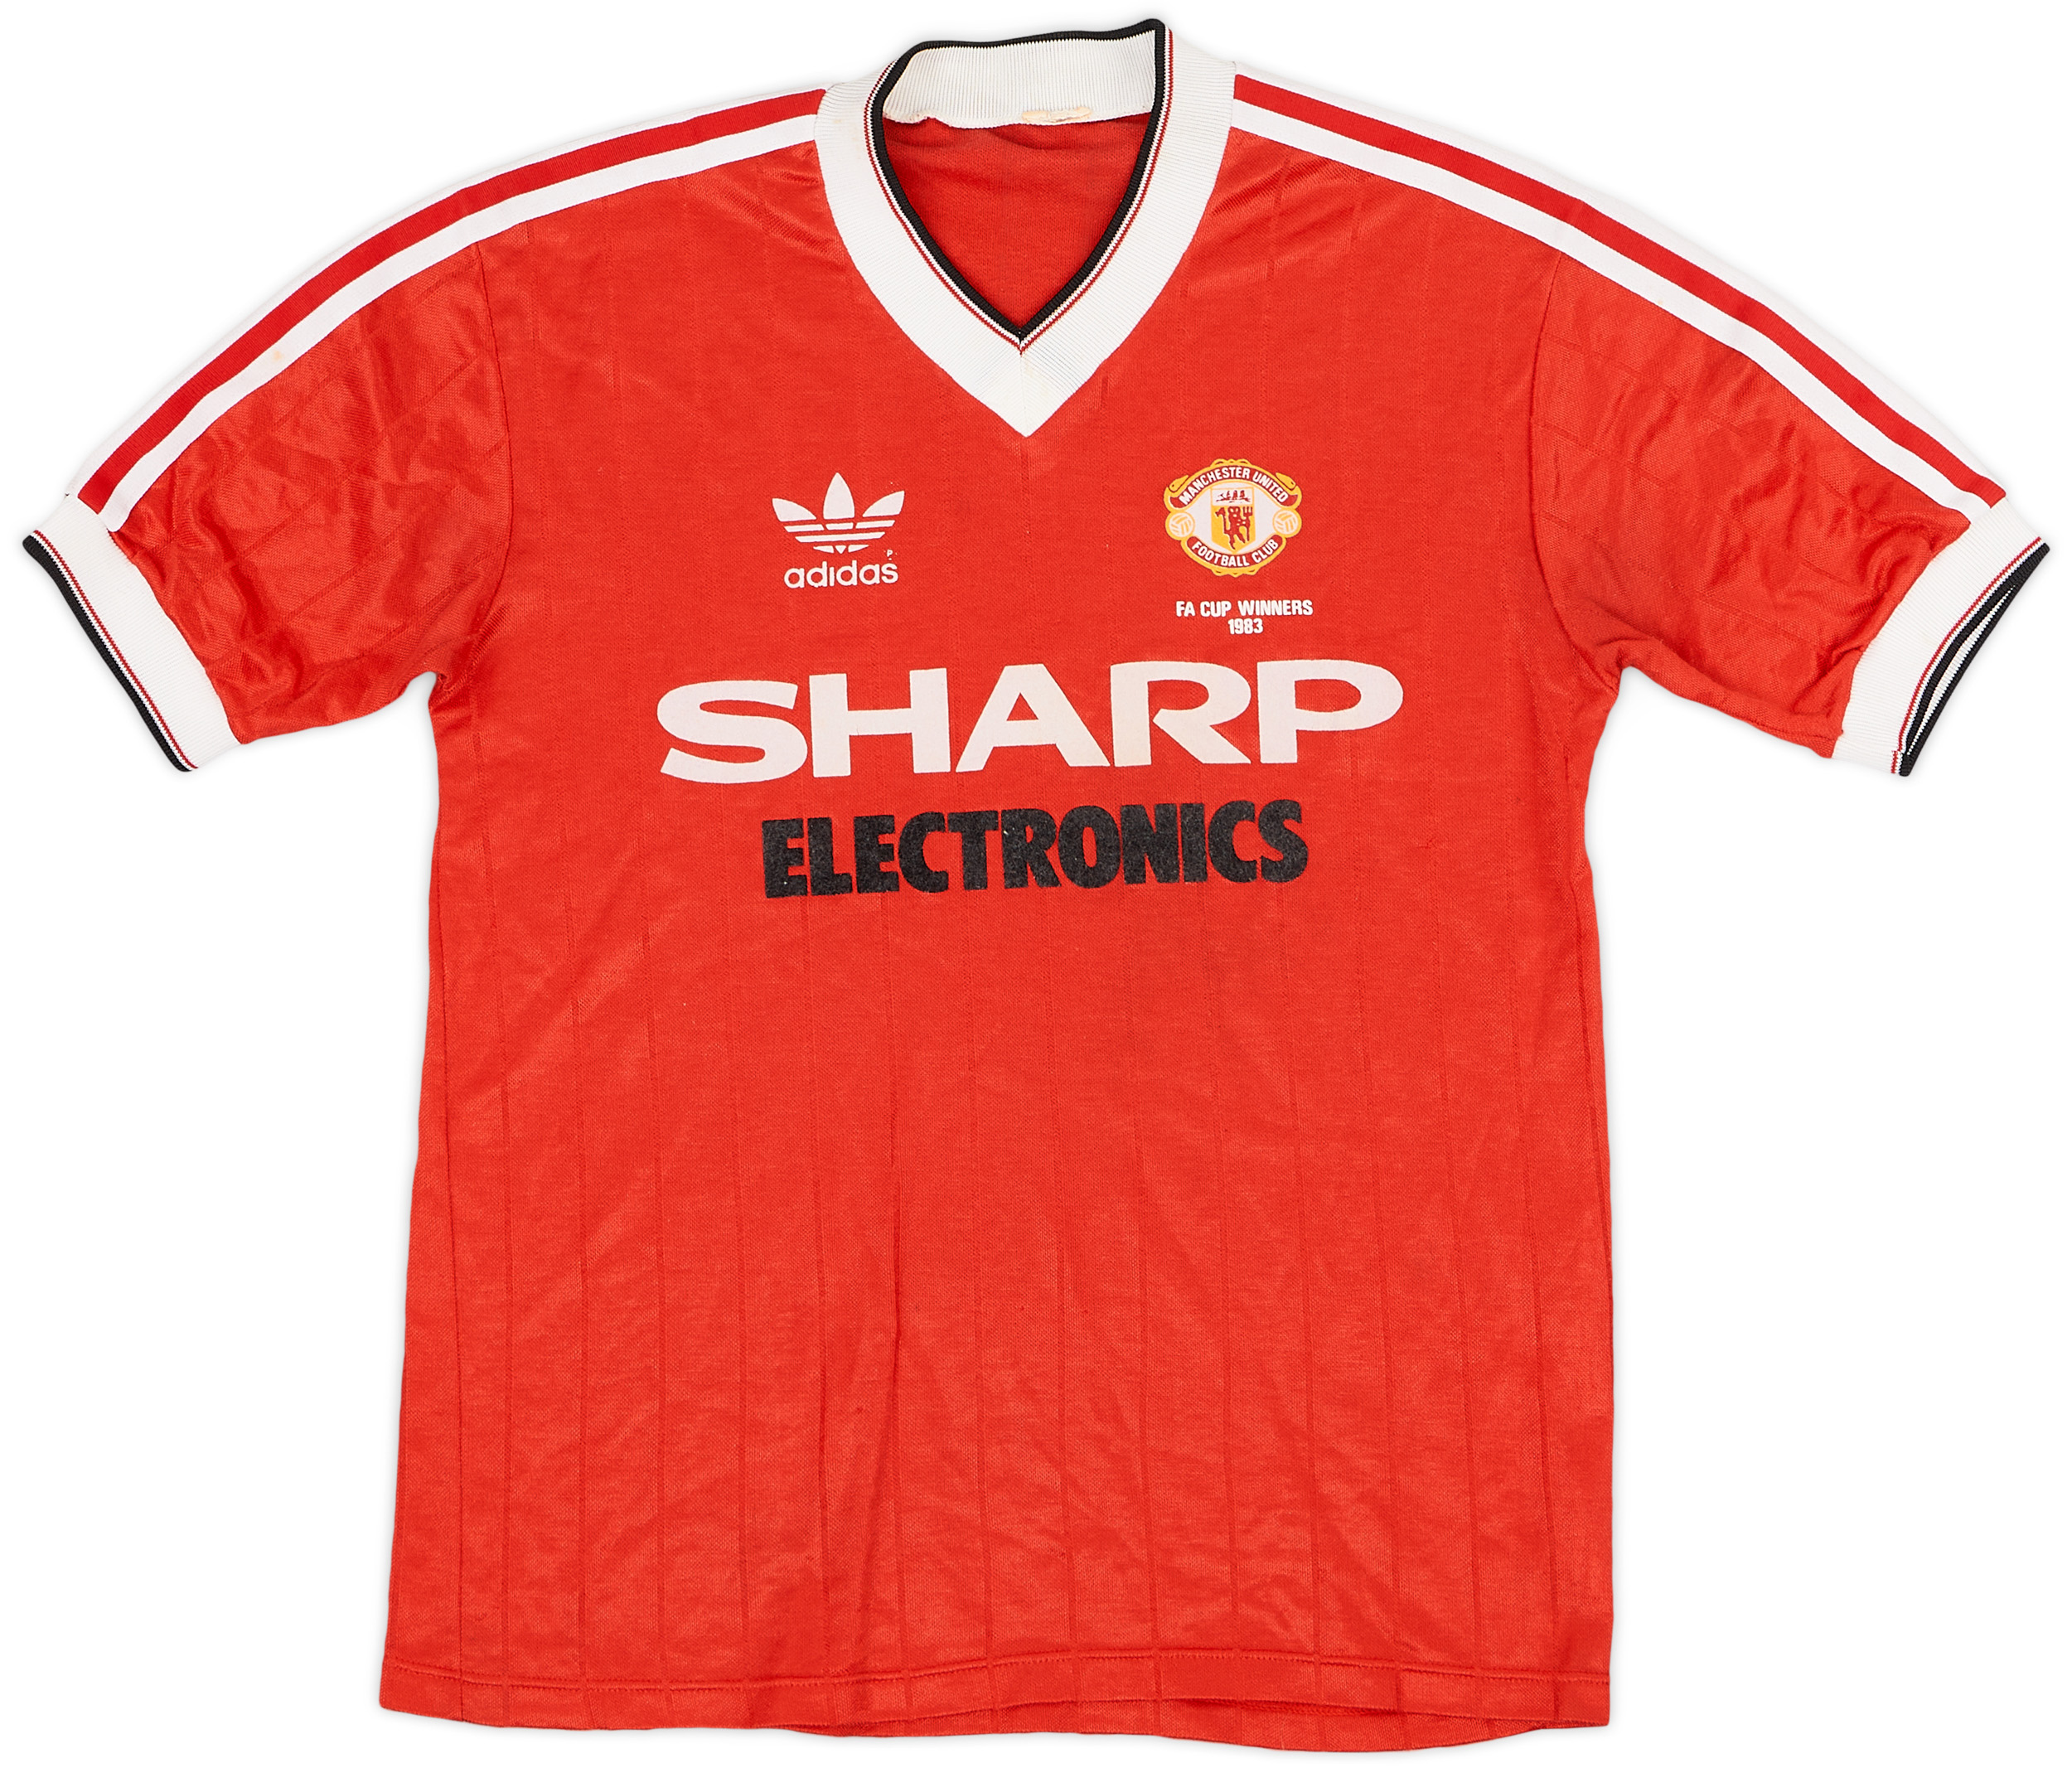 1983 Manchester United Home Shirt - 8/10 - ()